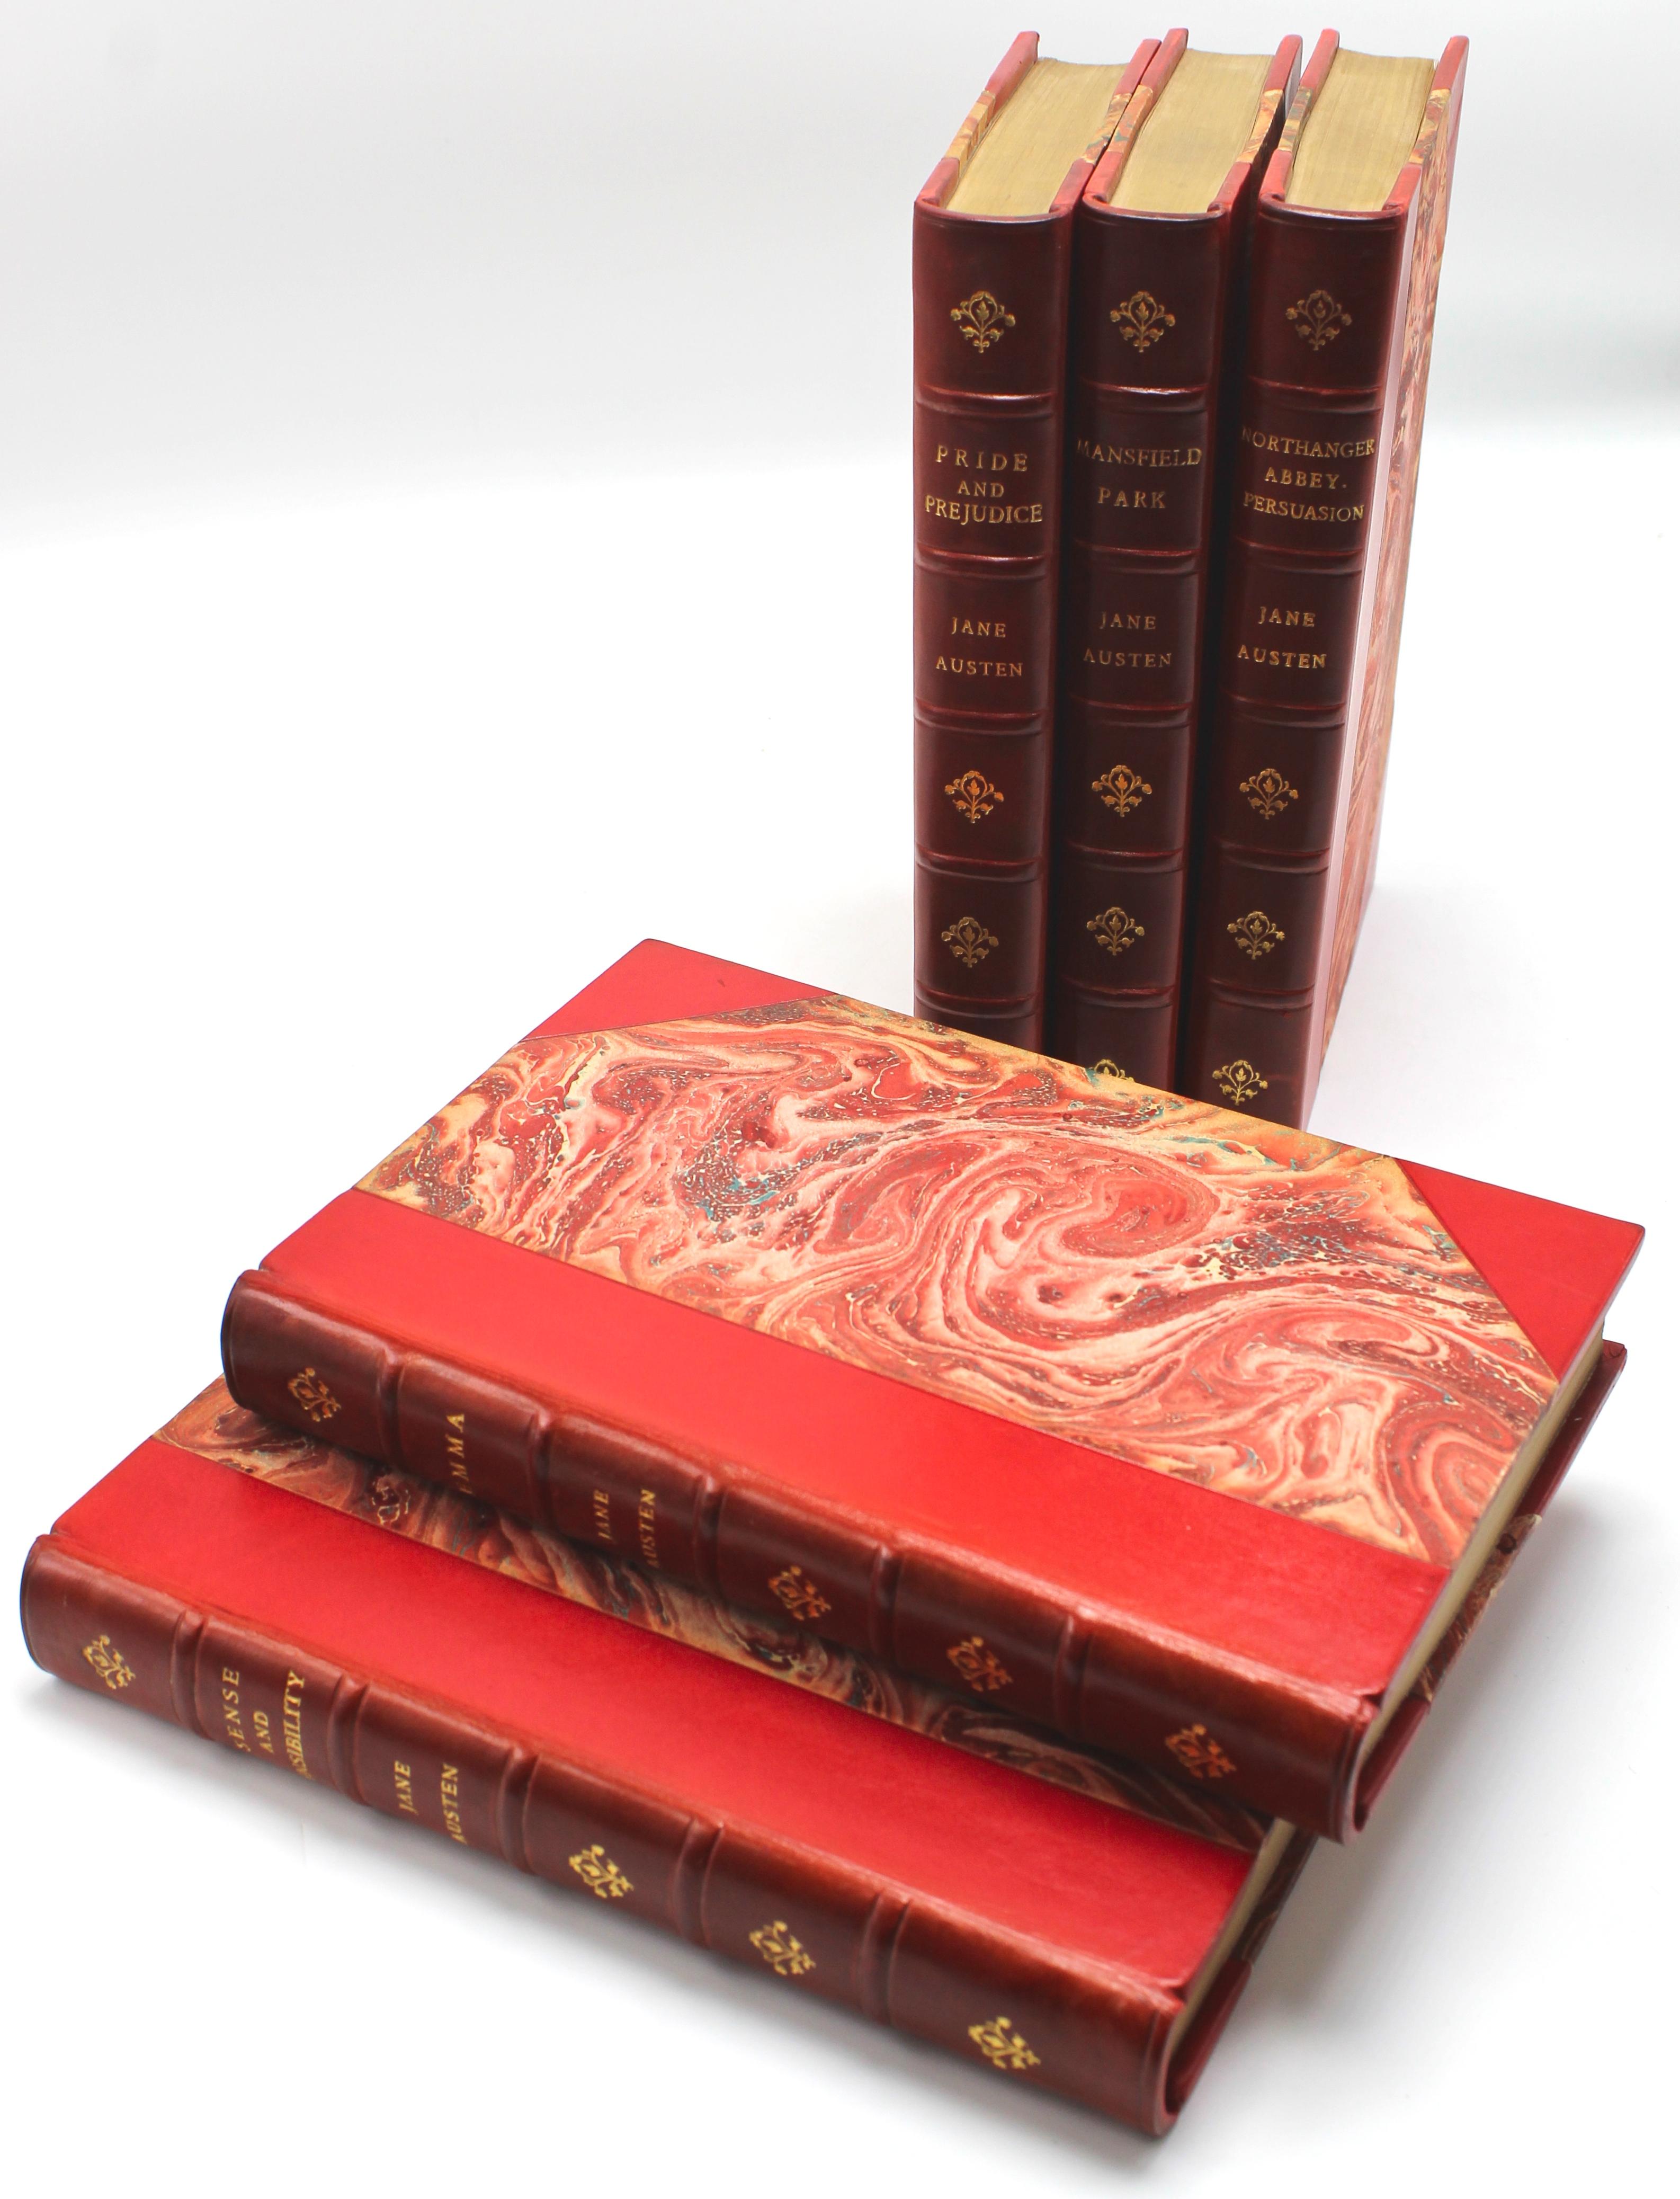 Leather Jane Austen's Works, Published by Robert Riviere & Son, Five Volume Set, 1920s